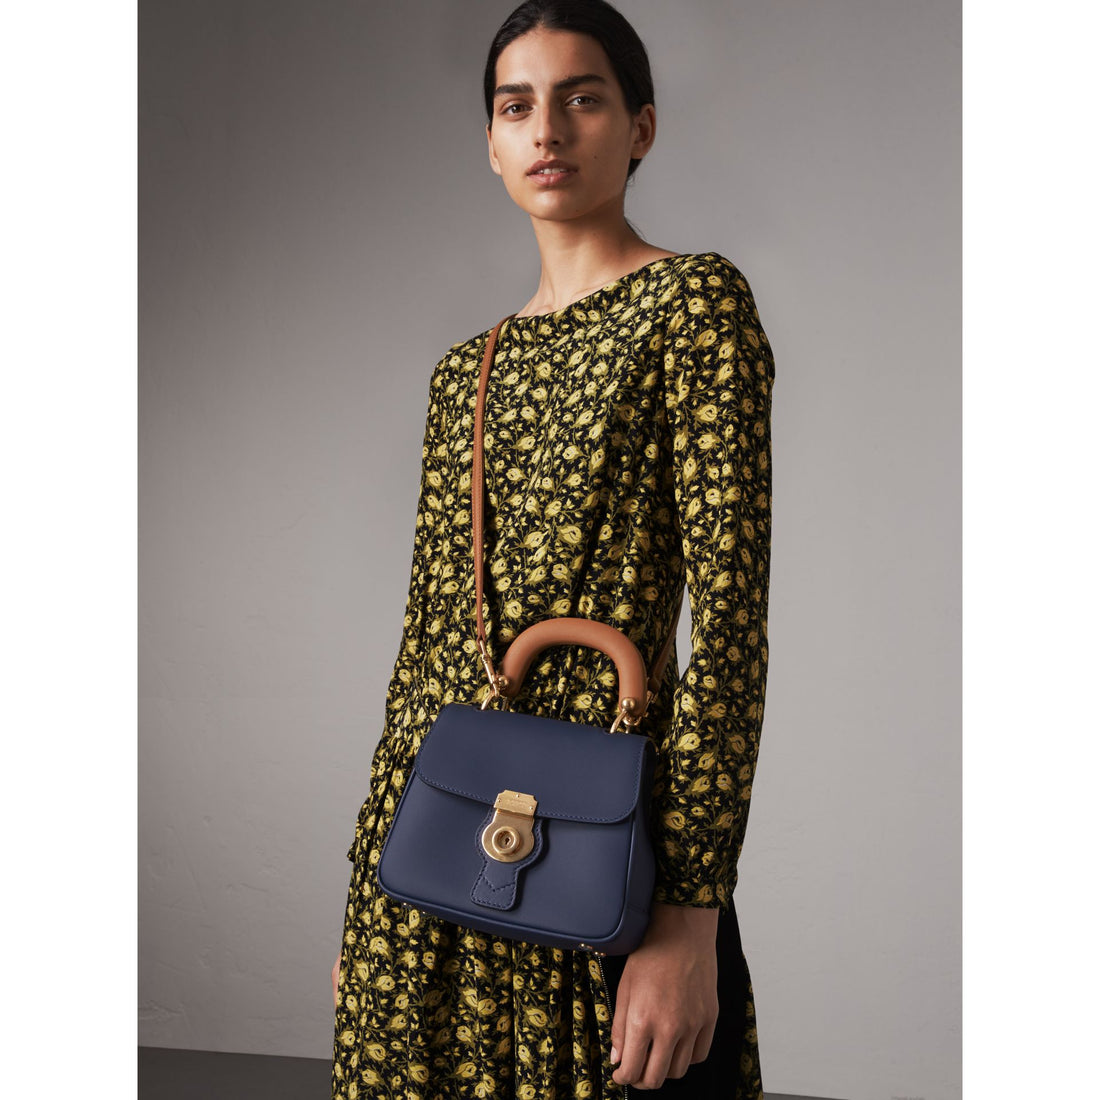 Burberry DK88 Small Top Handle Bag in Ink Blue – I MISS YOU VINTAGE